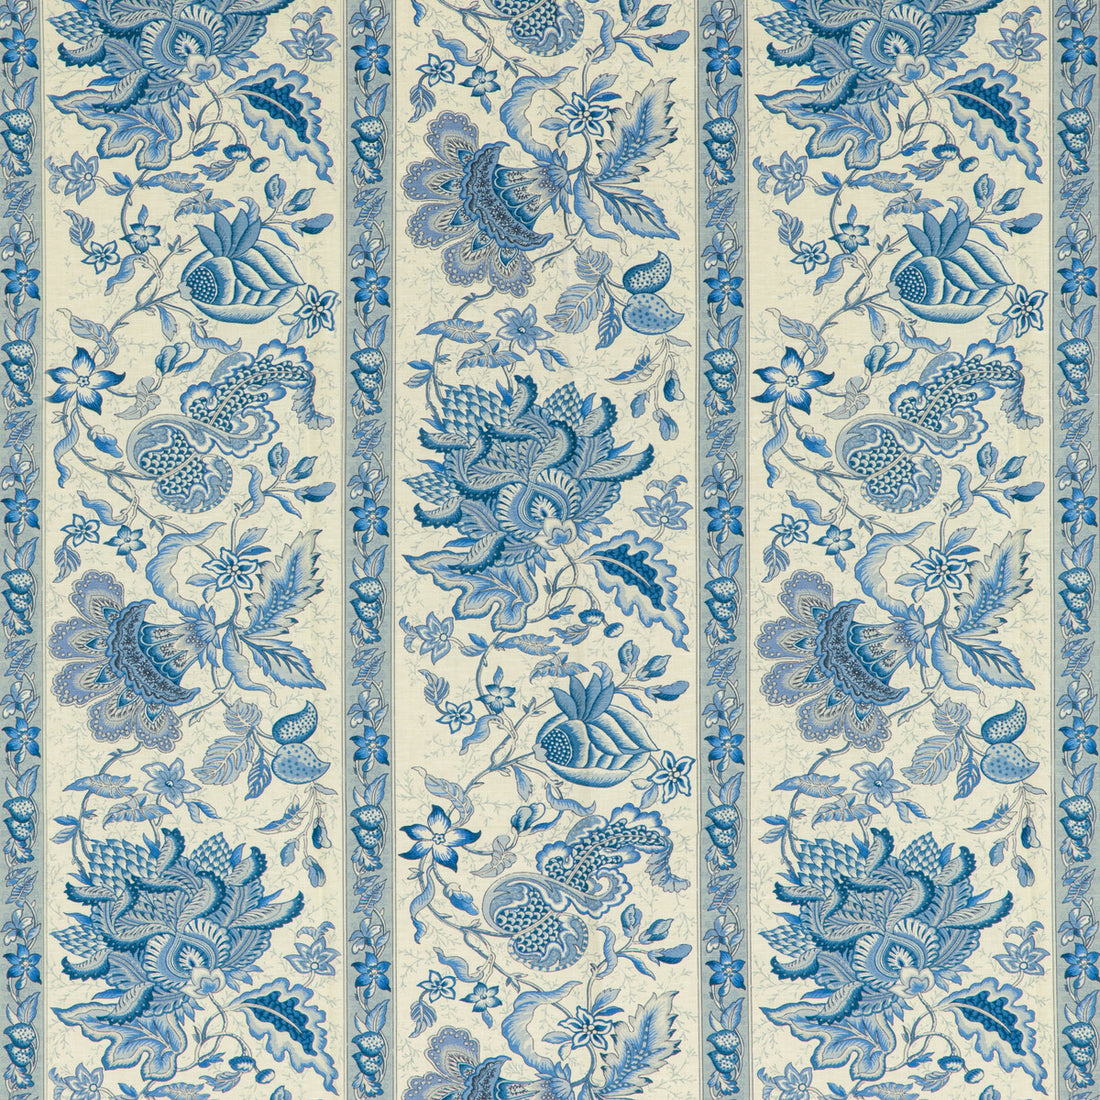 Montflours Print fabric in blue color - pattern 8020120.5.0 - by Brunschwig &amp; Fils in the Louverne collection